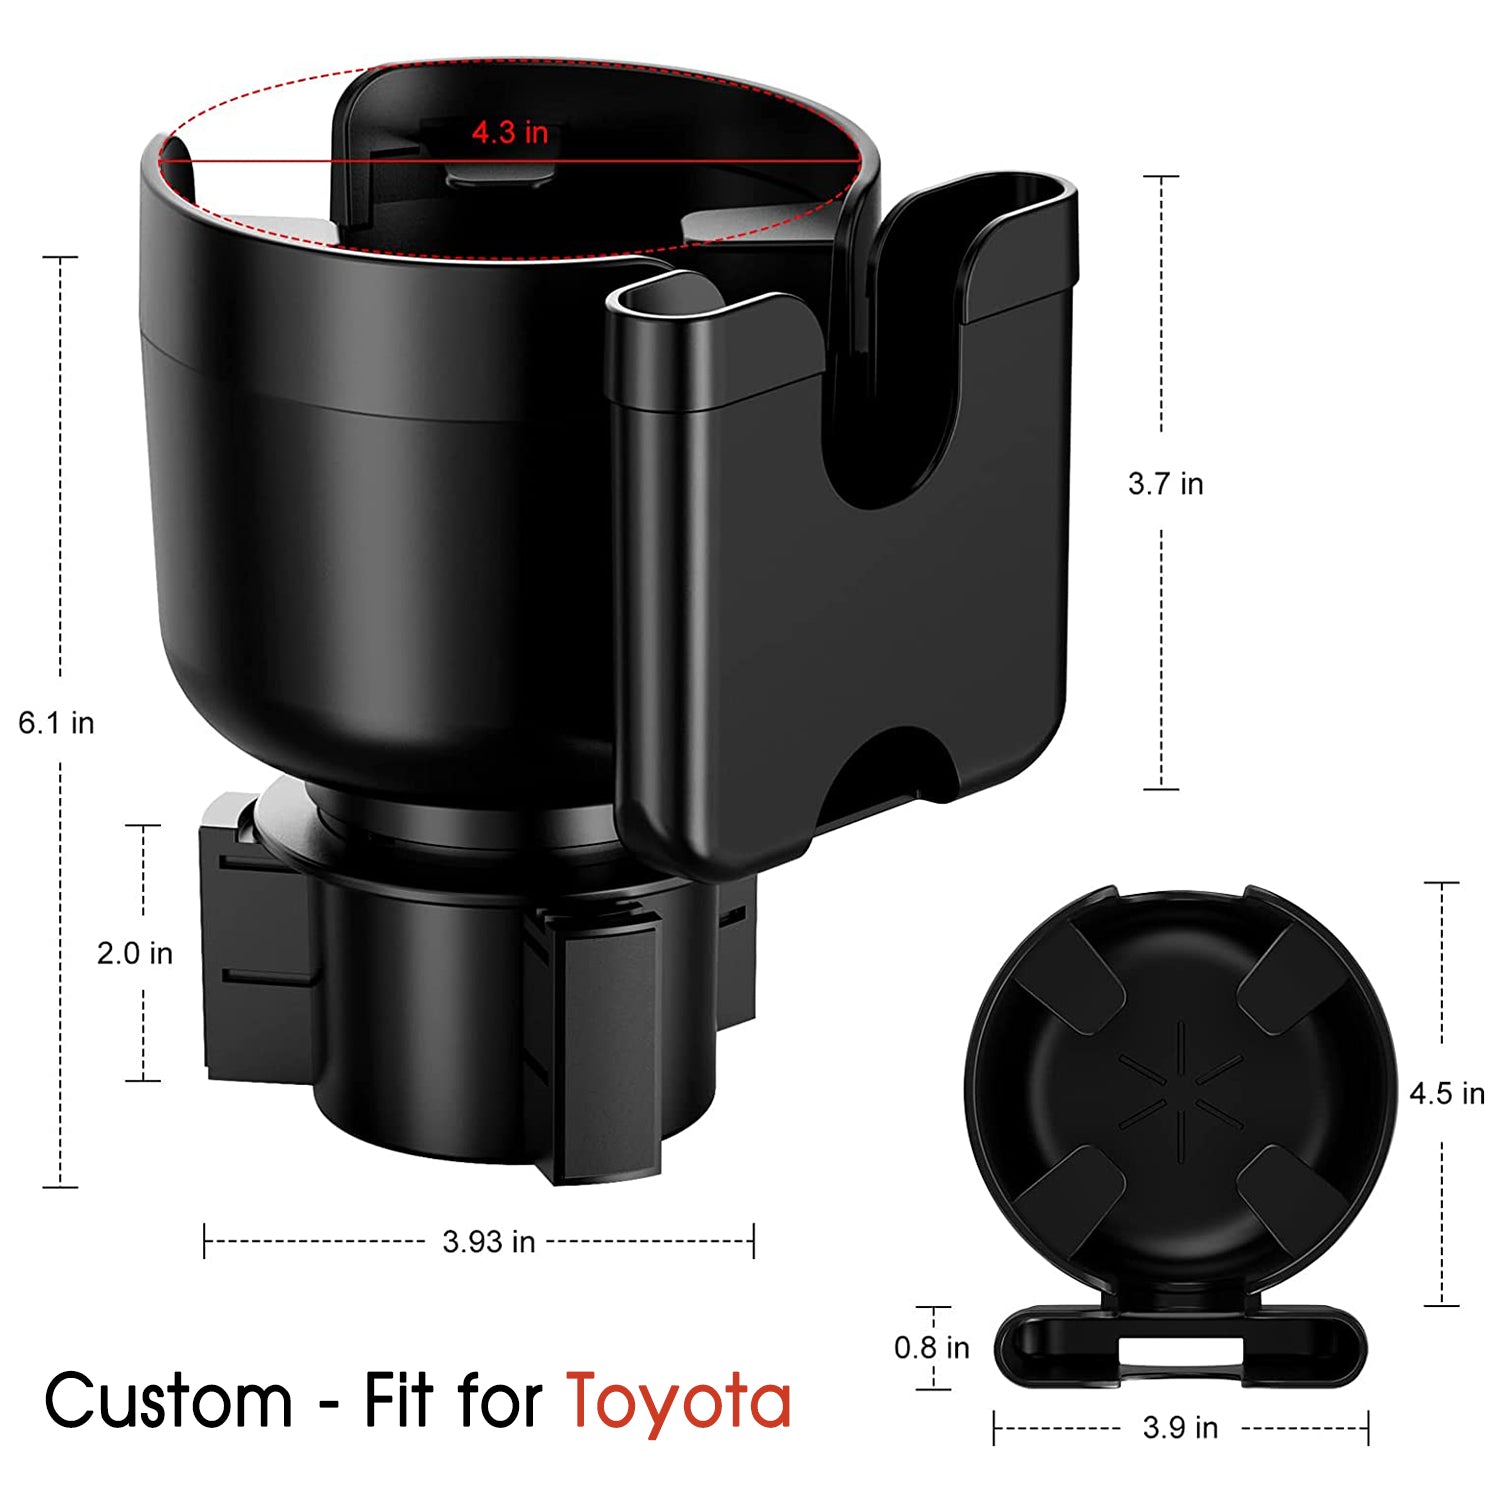 Car Cup Holder 2-in-1, Custom-Fit For Car, Car Cup Holder Expander Adapter with Adjustable Base, Car Cup Holder Expander Organizer with Phone Holder DLPF233